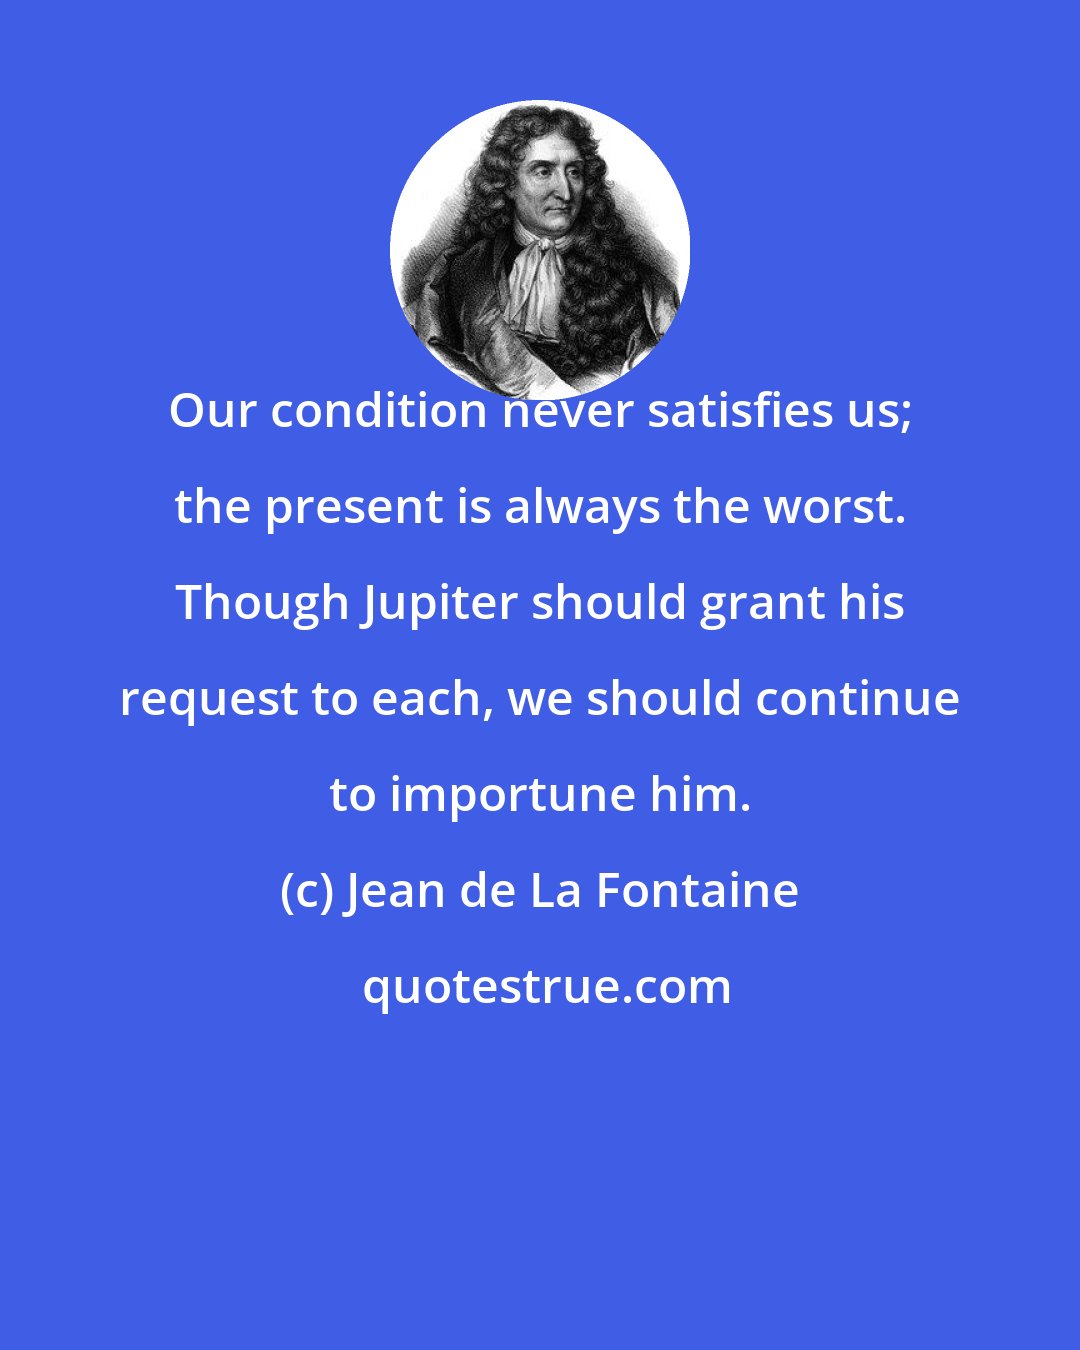 Jean de La Fontaine: Our condition never satisfies us; the present is always the worst. Though Jupiter should grant his request to each, we should continue to importune him.